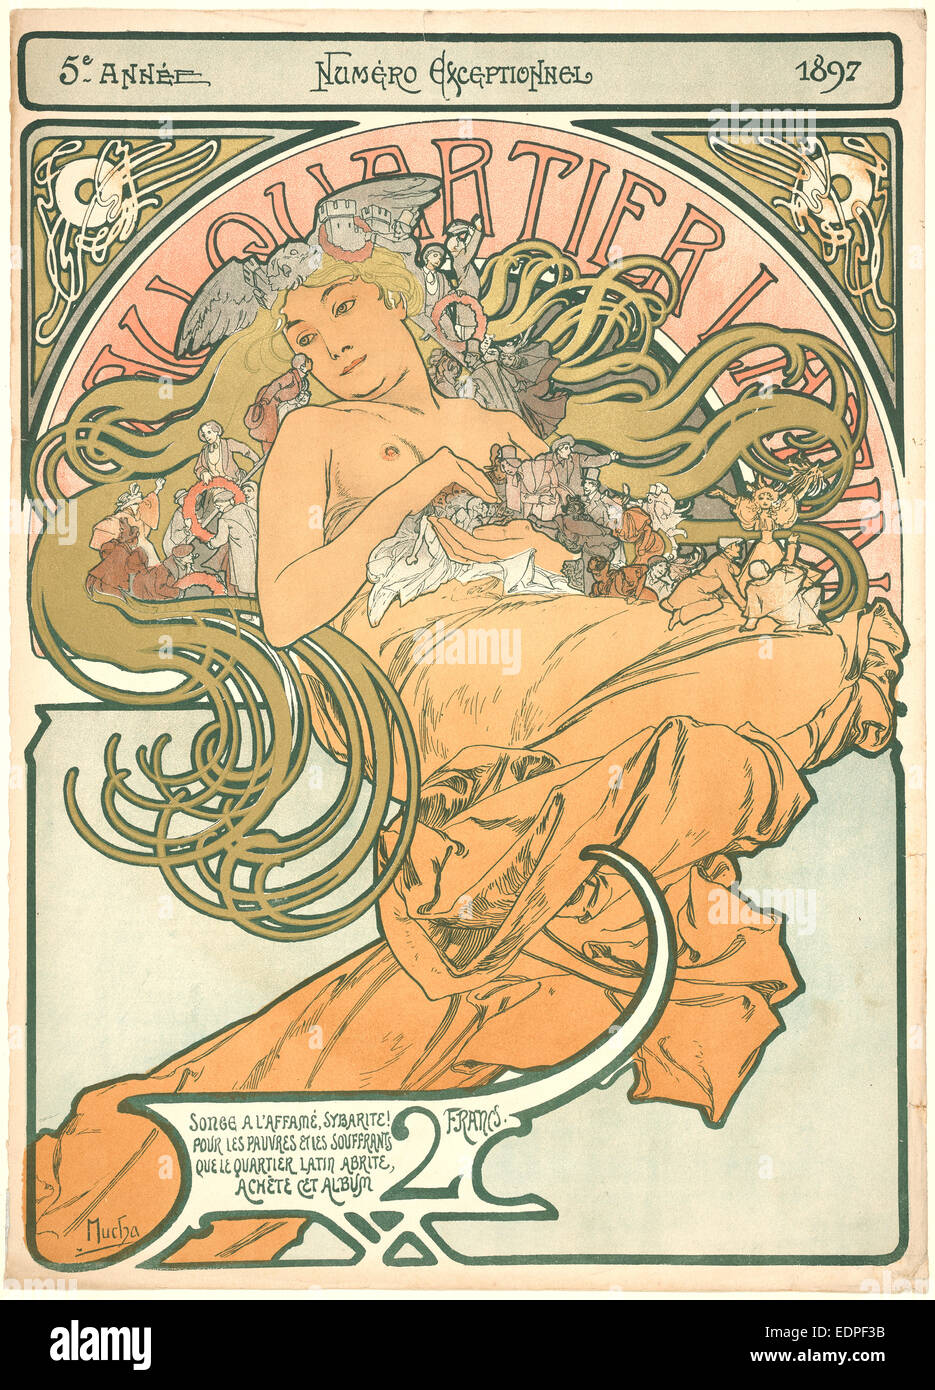 Alphonse Mucha (Czech, 1860 - 1939). Au Quartier Latin, 1897. Color lithograph printed in 6 colors on wove paper Stock Photo